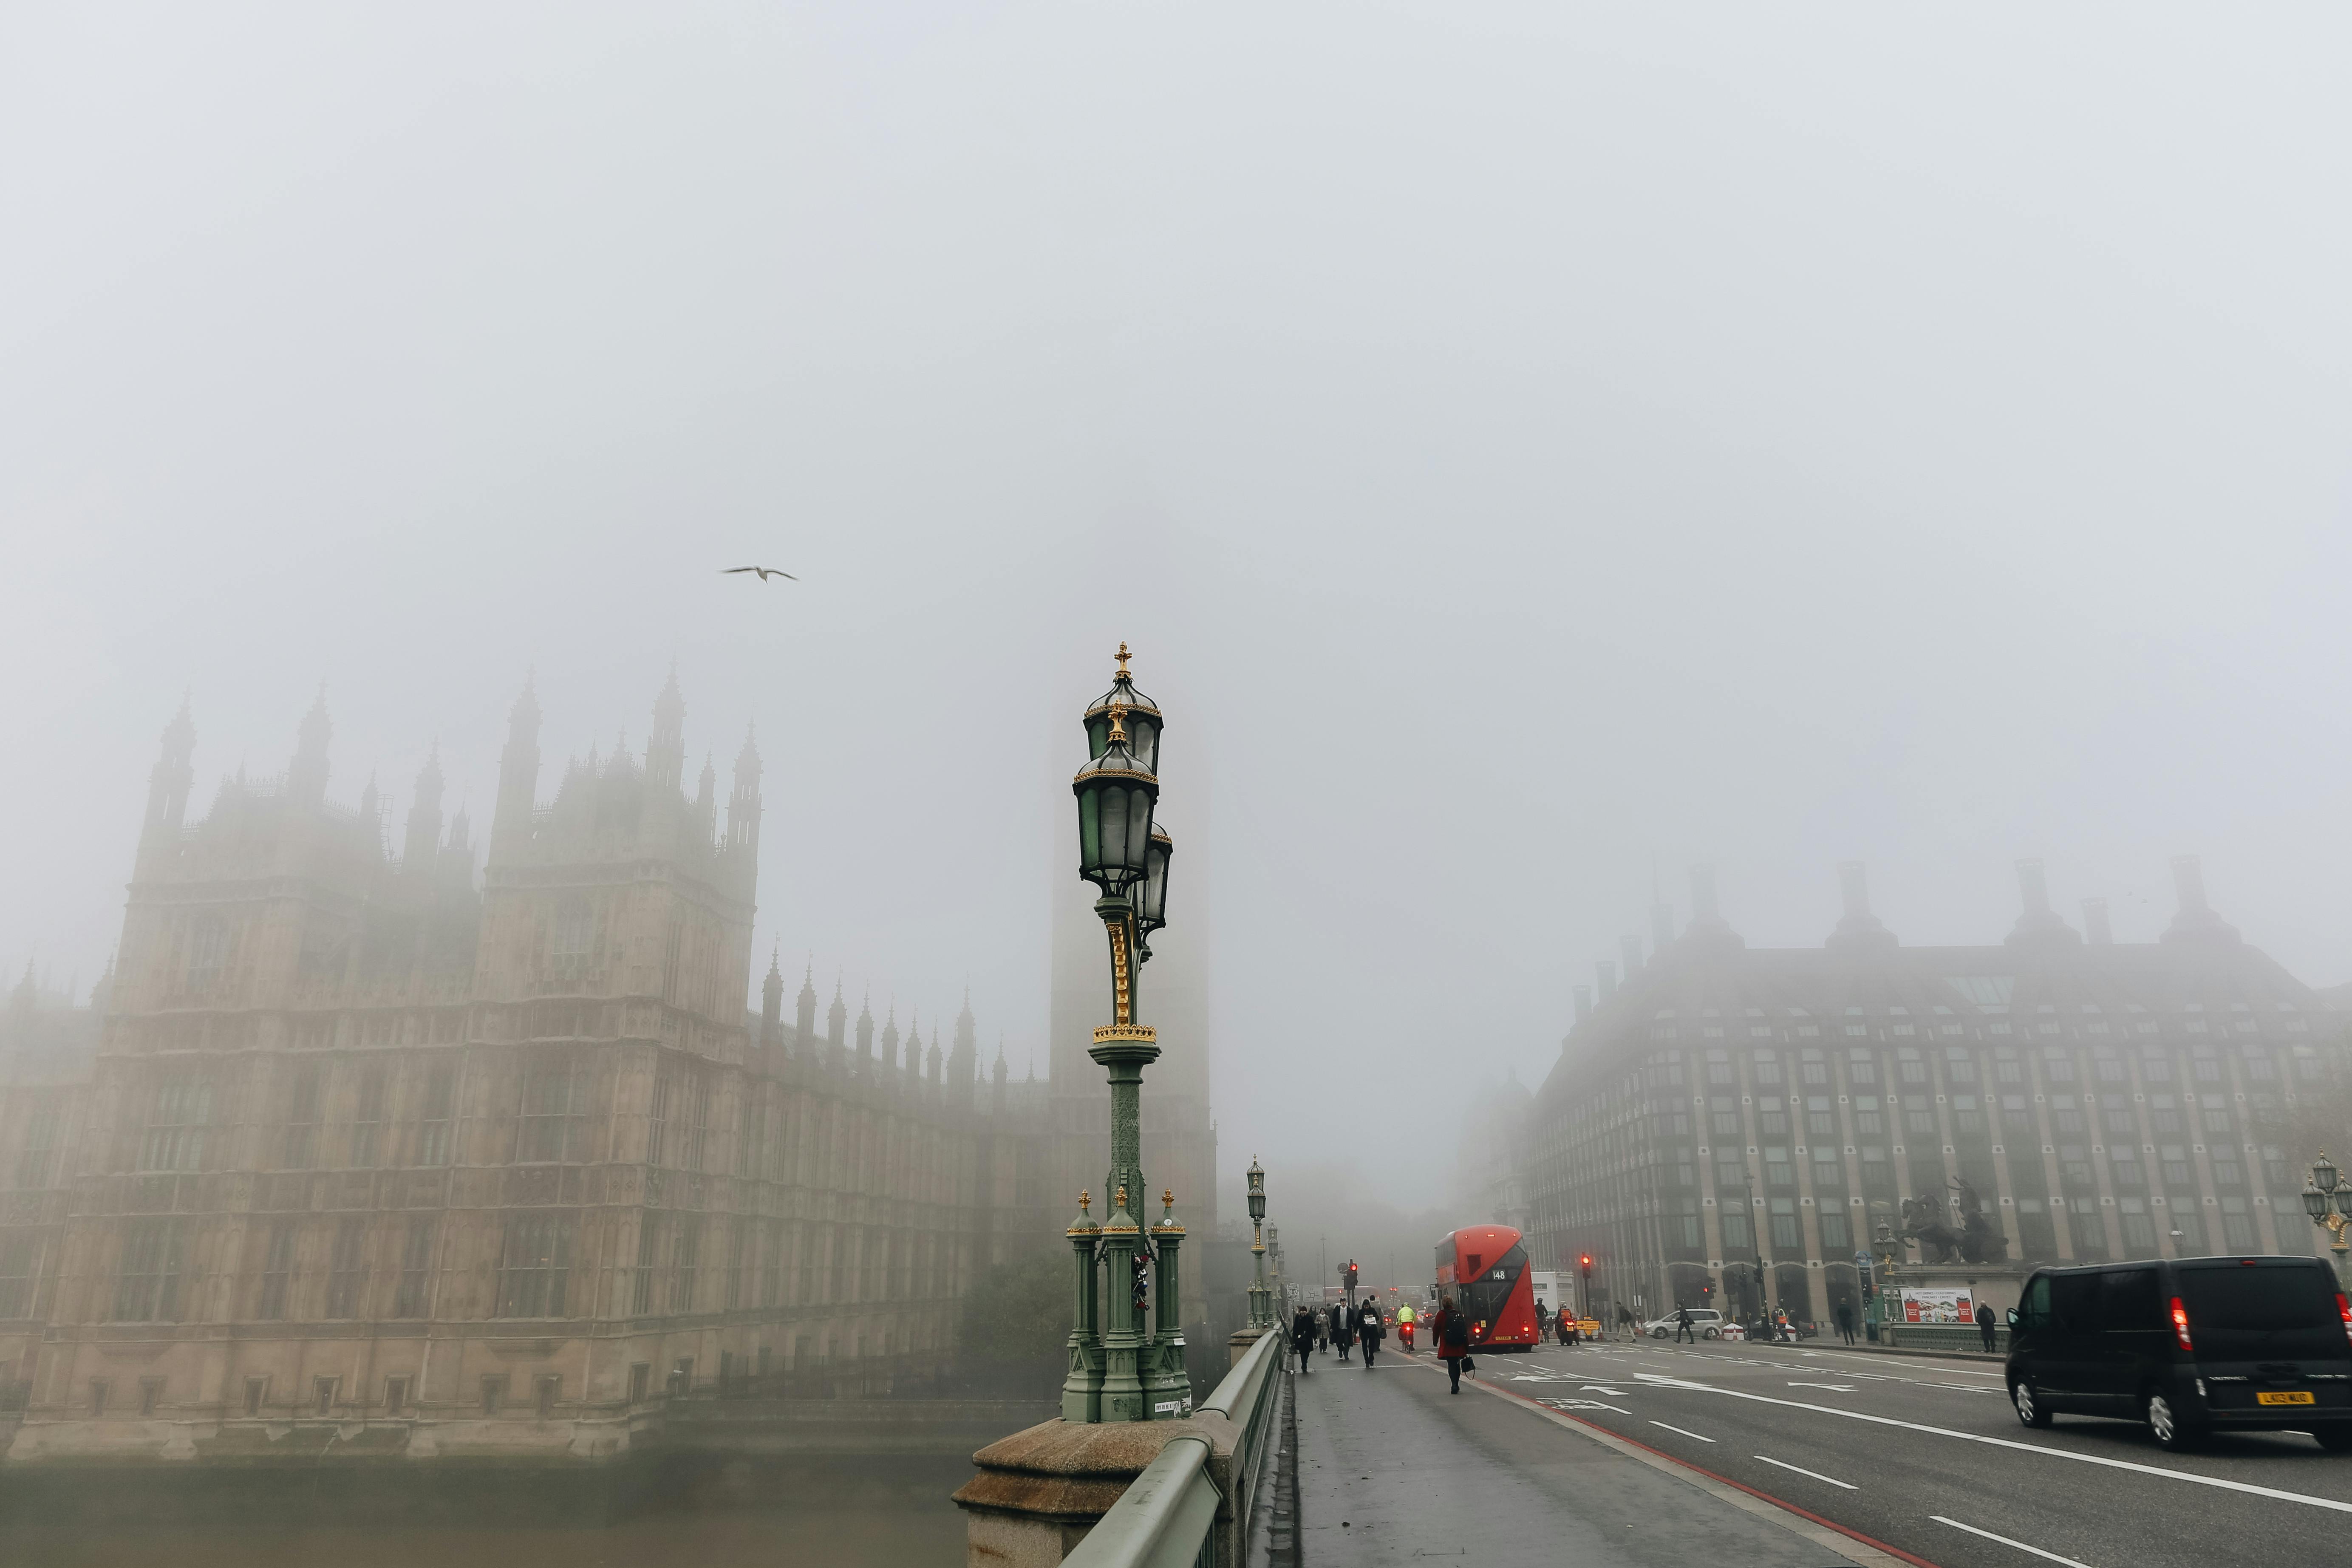 Houses of Parliament blanketed in fog in London